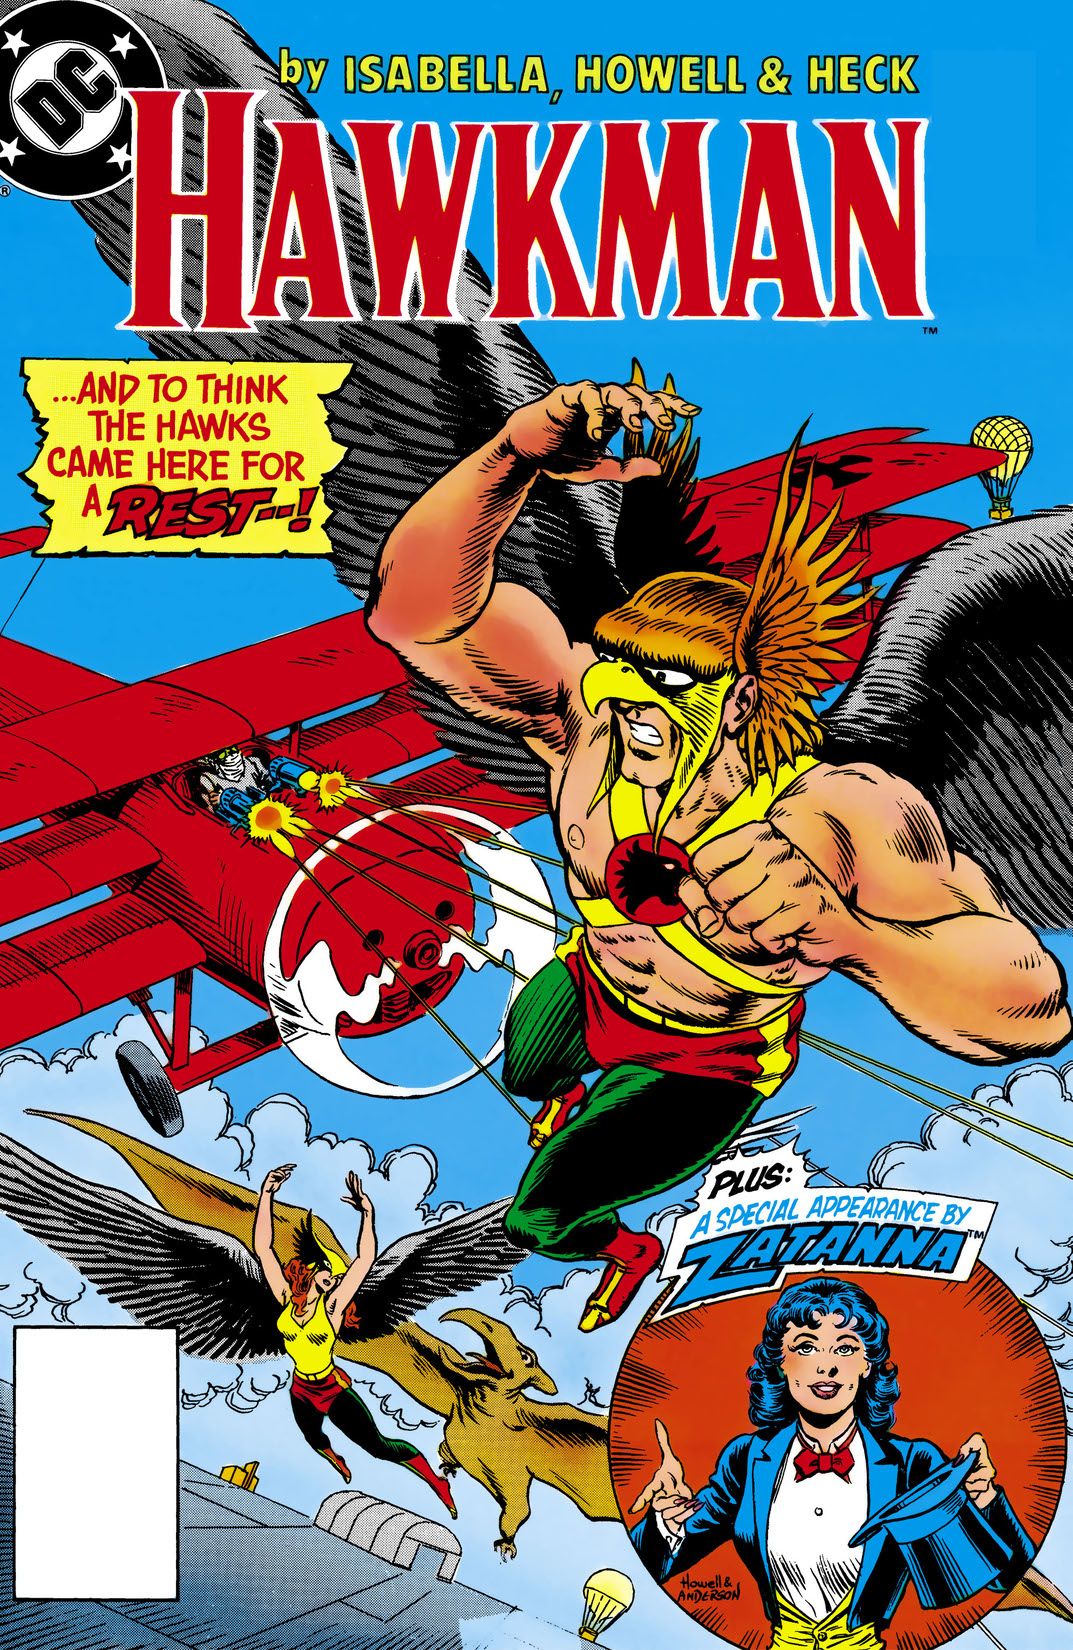 Hawkman (1986-) #4 preview images